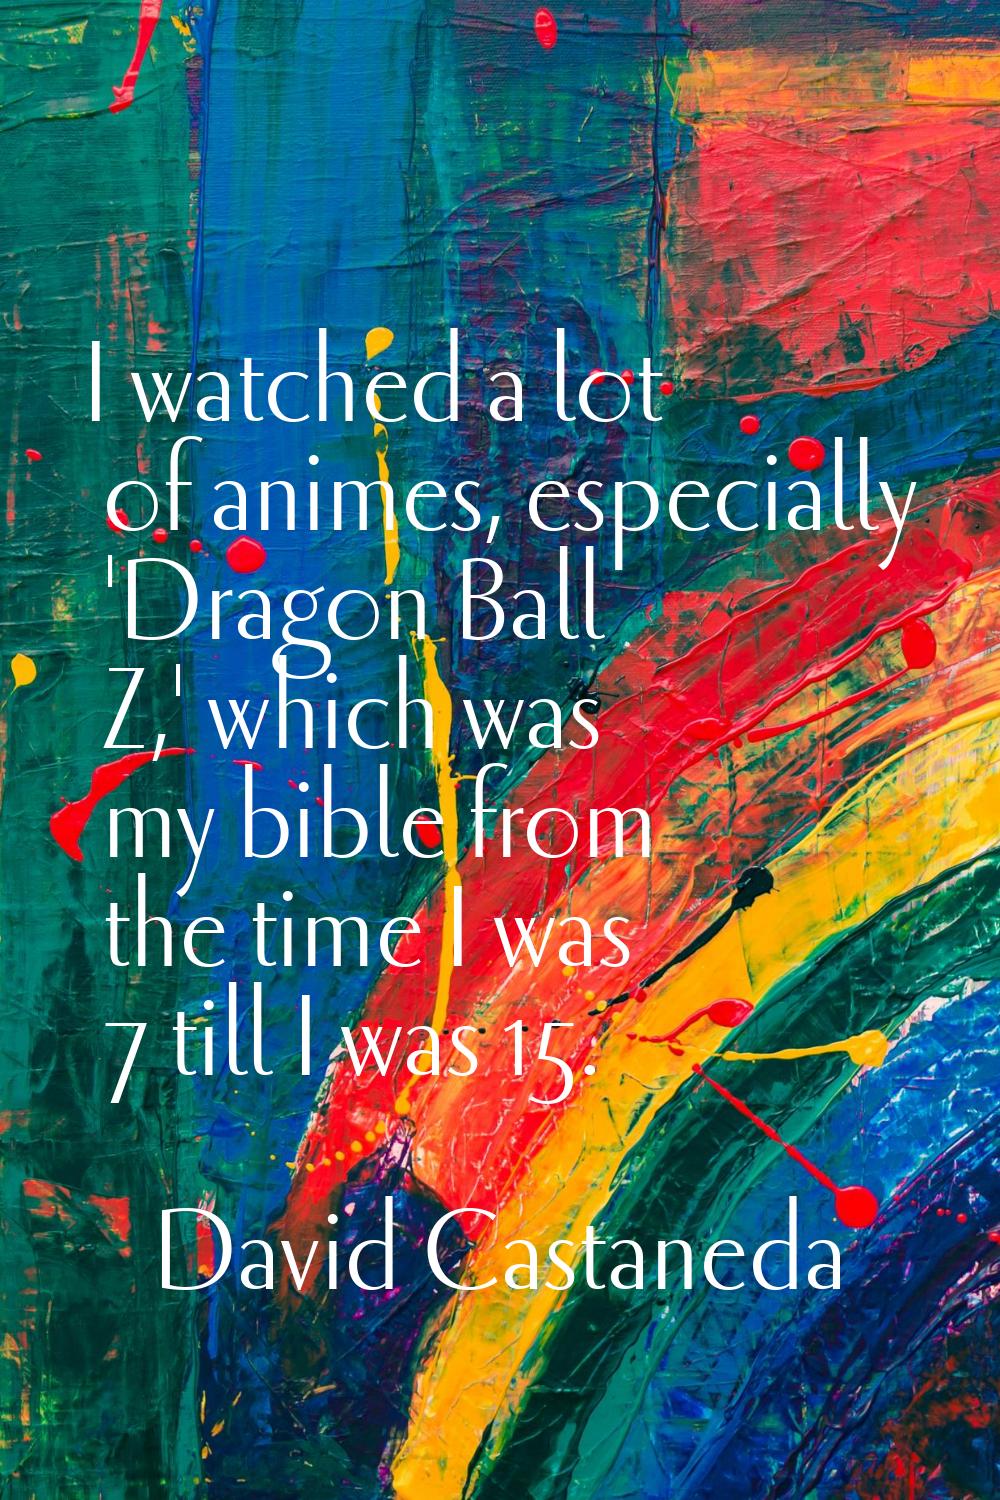 I watched a lot of animes, especially 'Dragon Ball Z,' which was my bible from the time I was 7 til